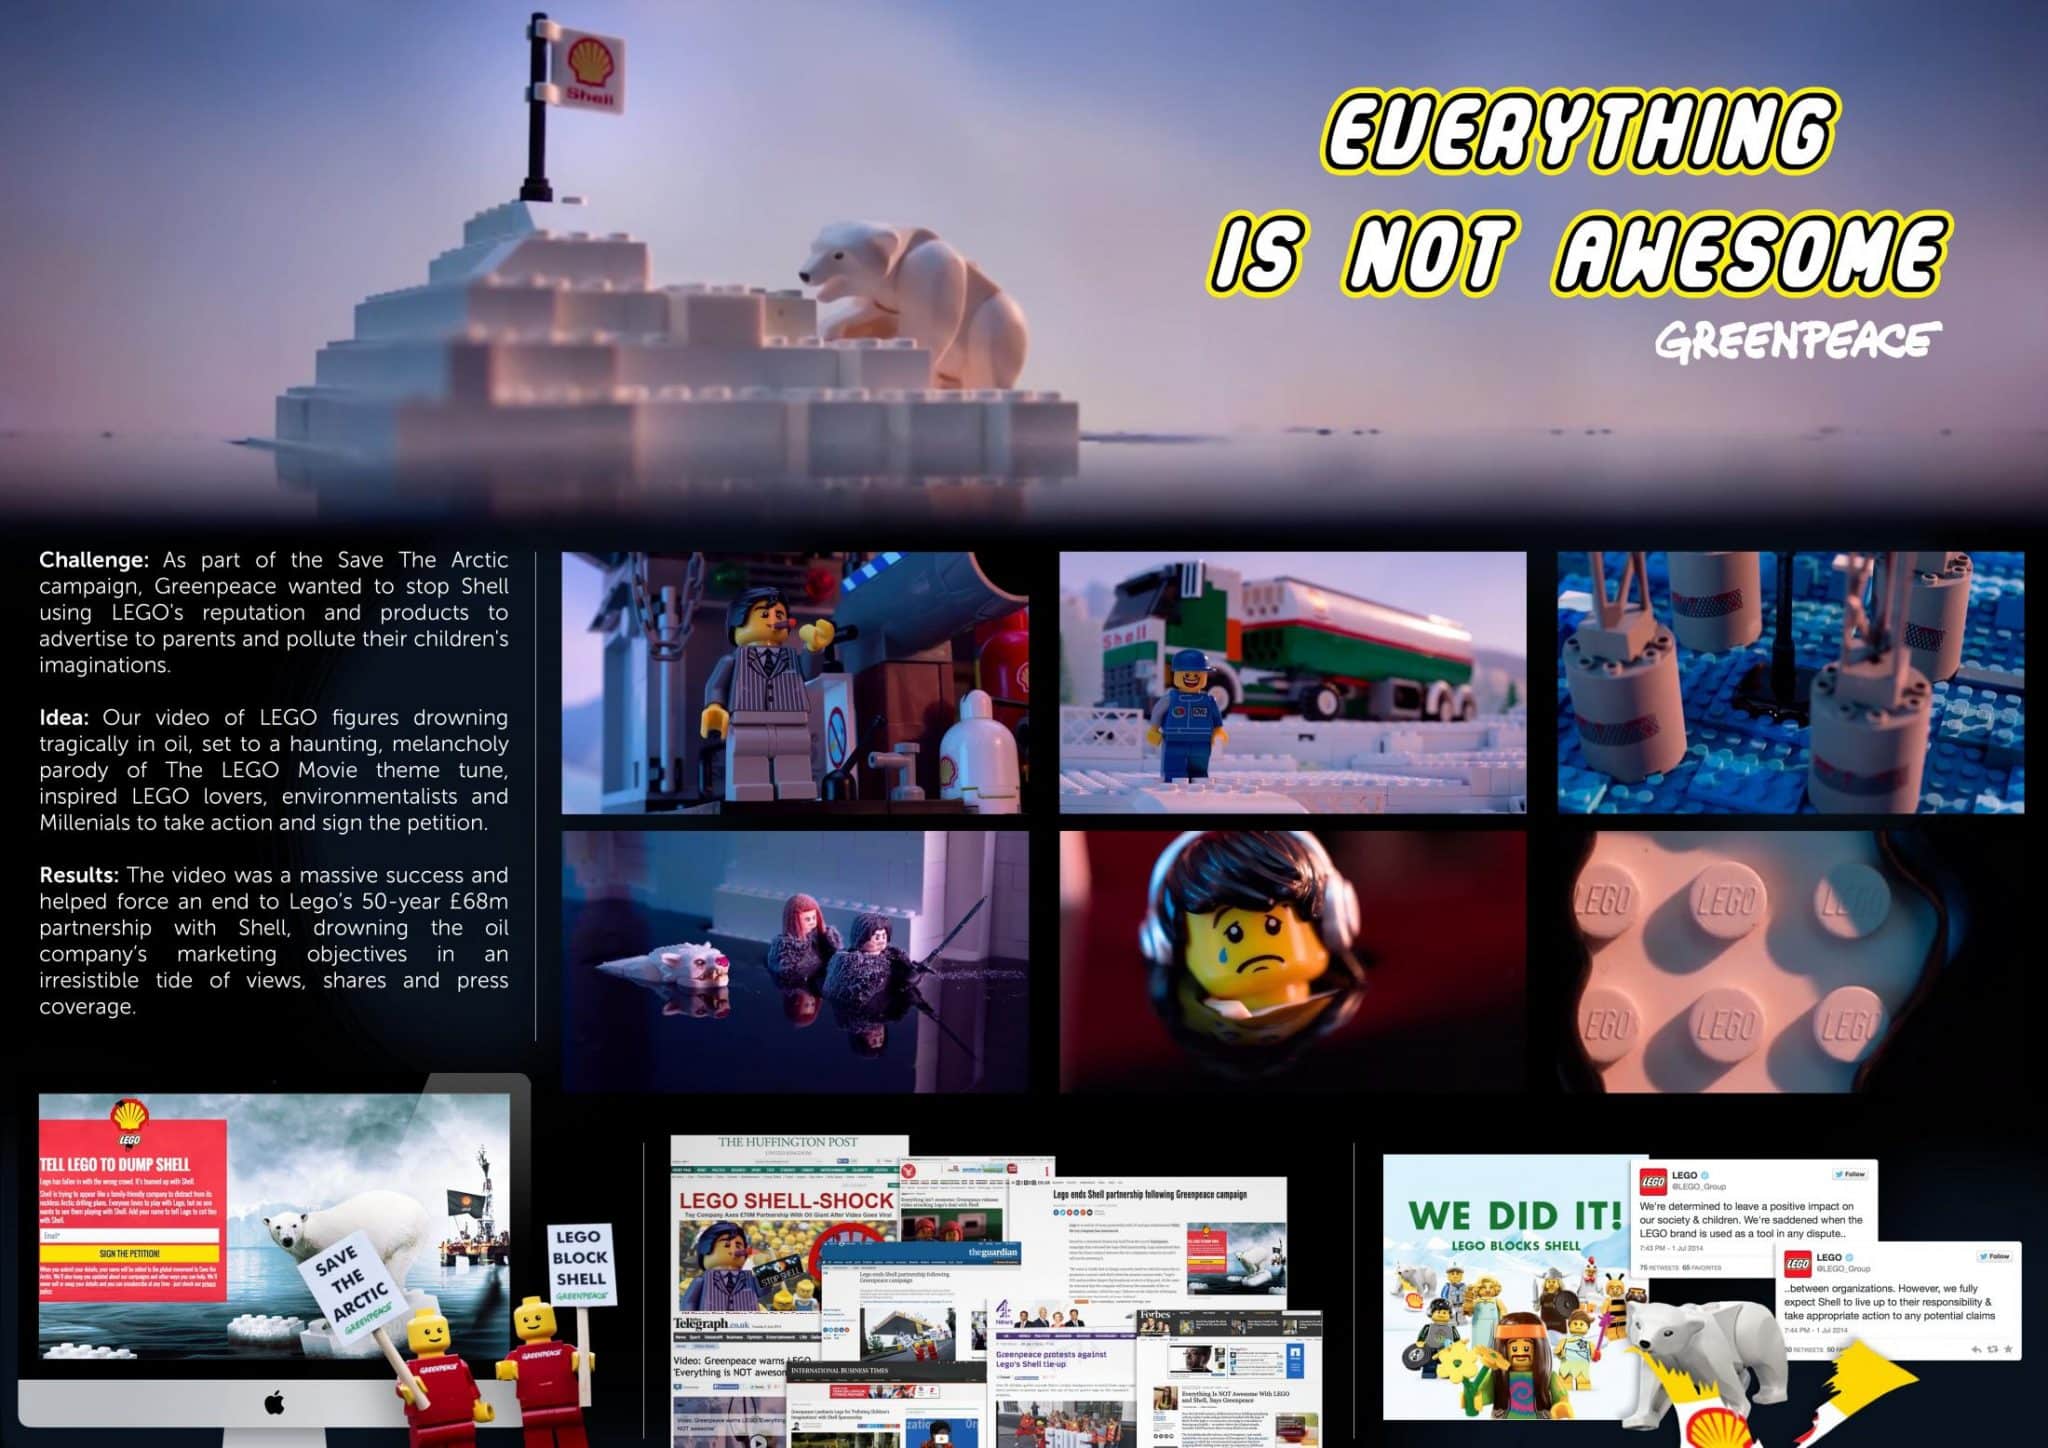 LEGO: Everything is NOT awesome